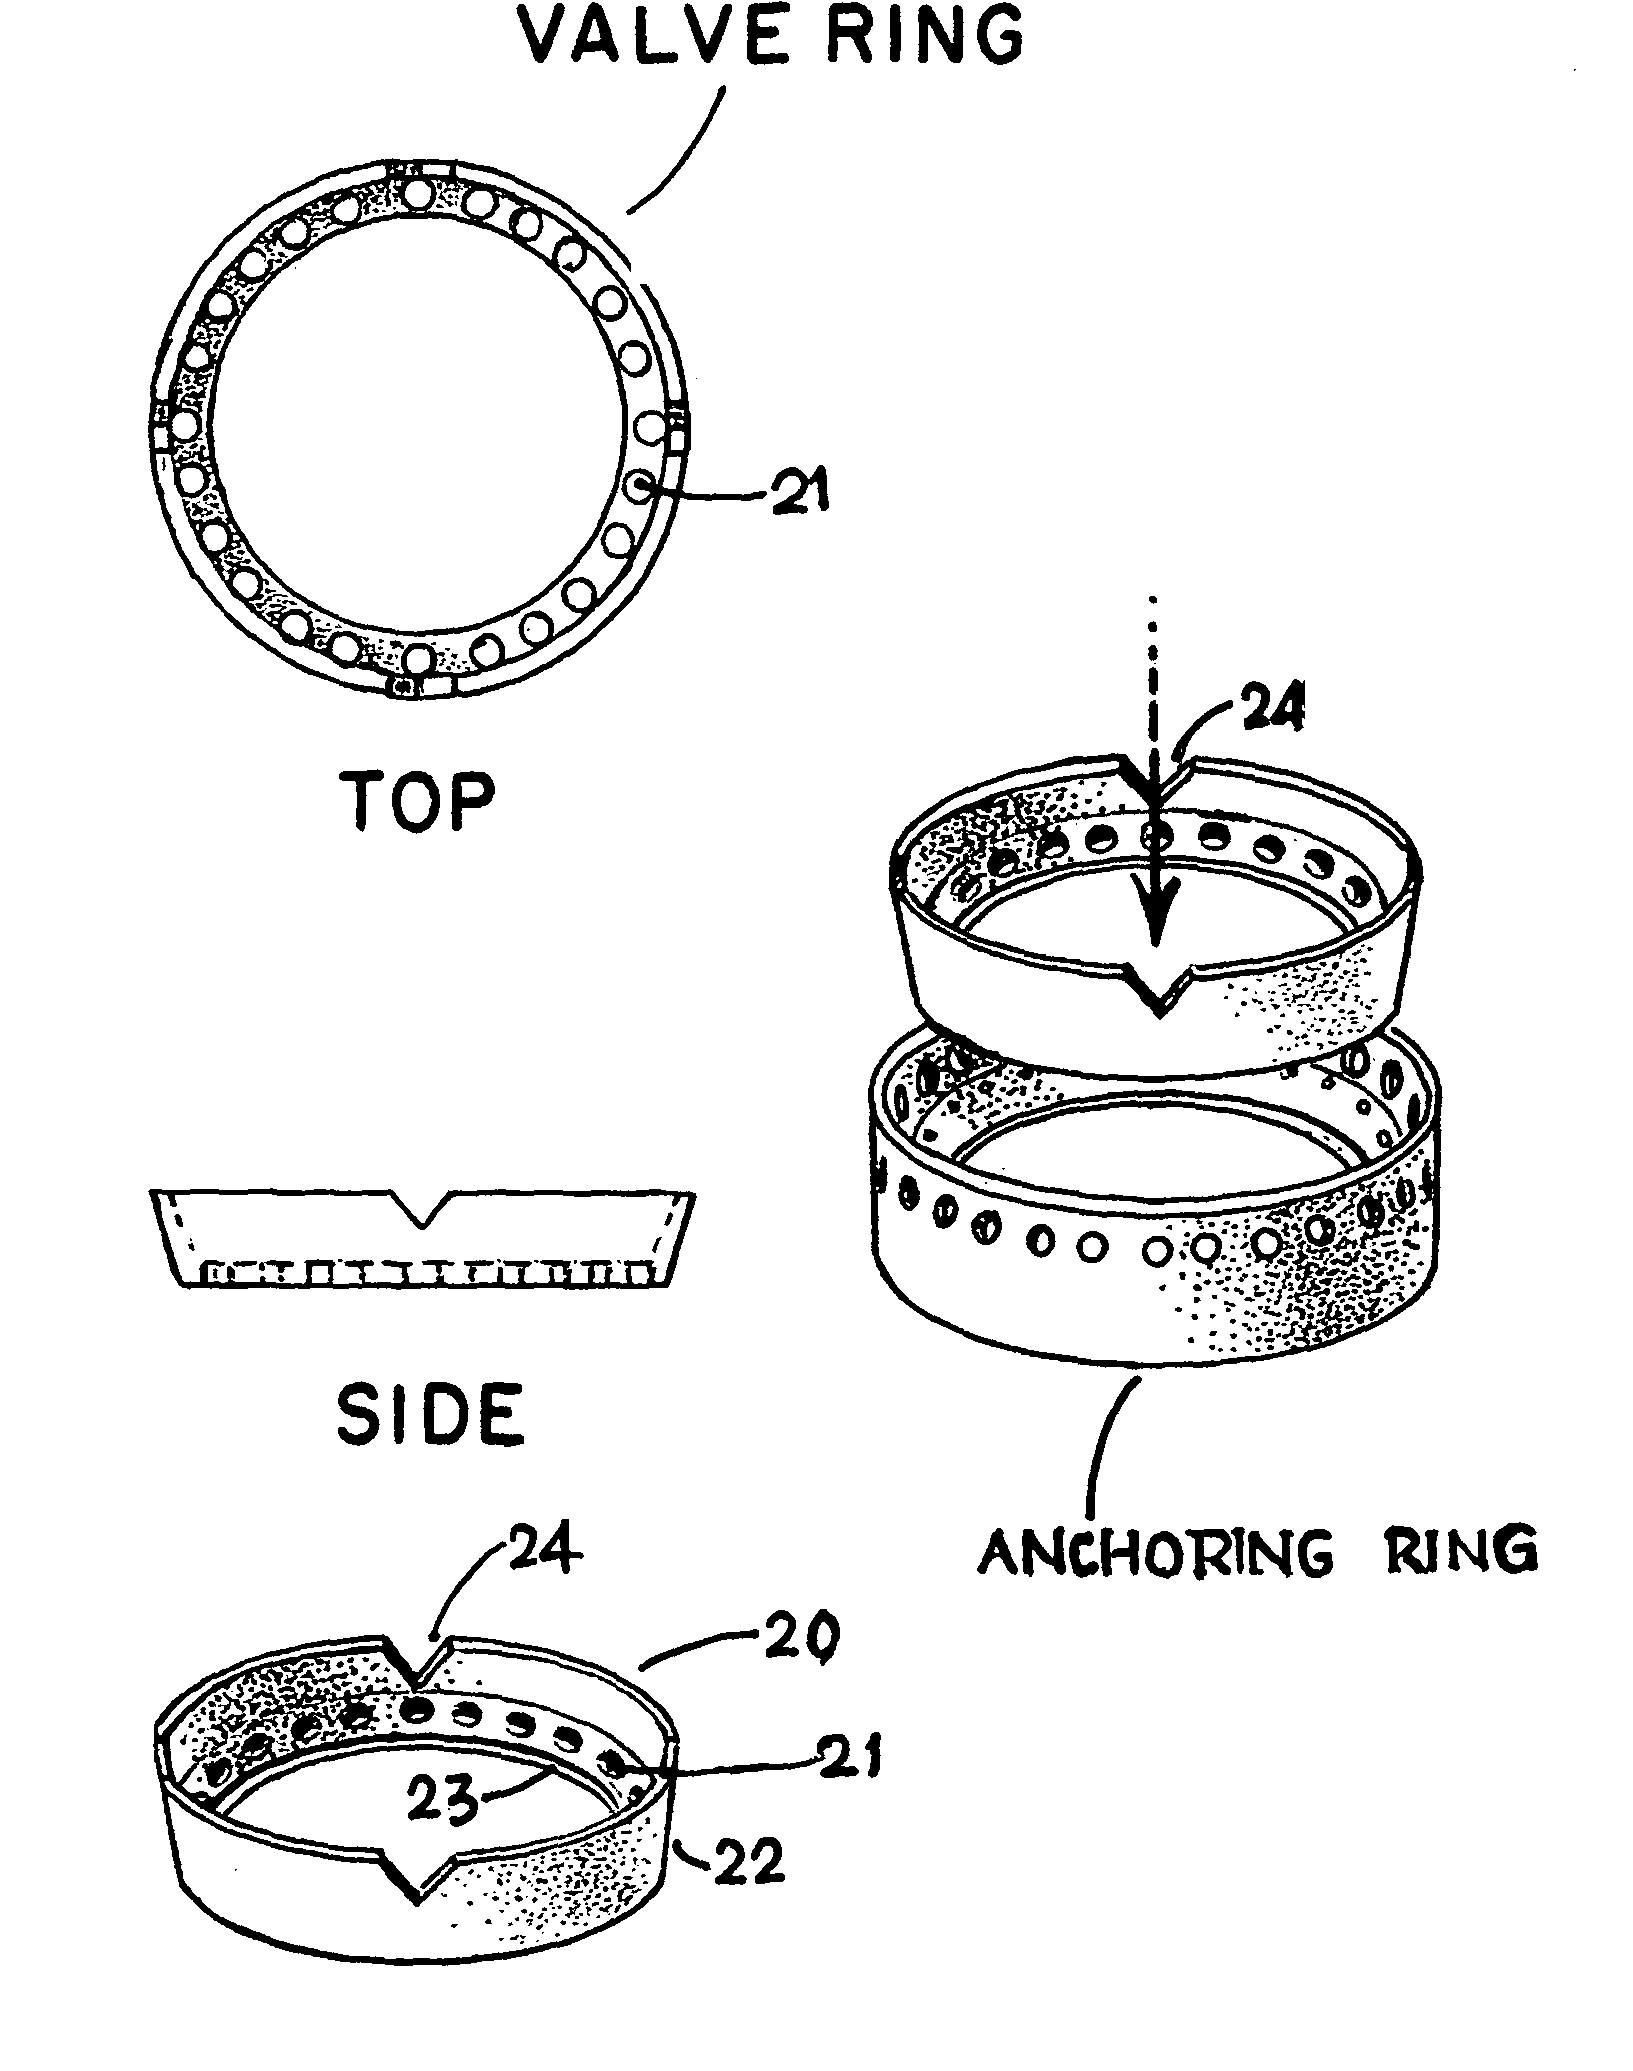 System and method for heart valve replacement